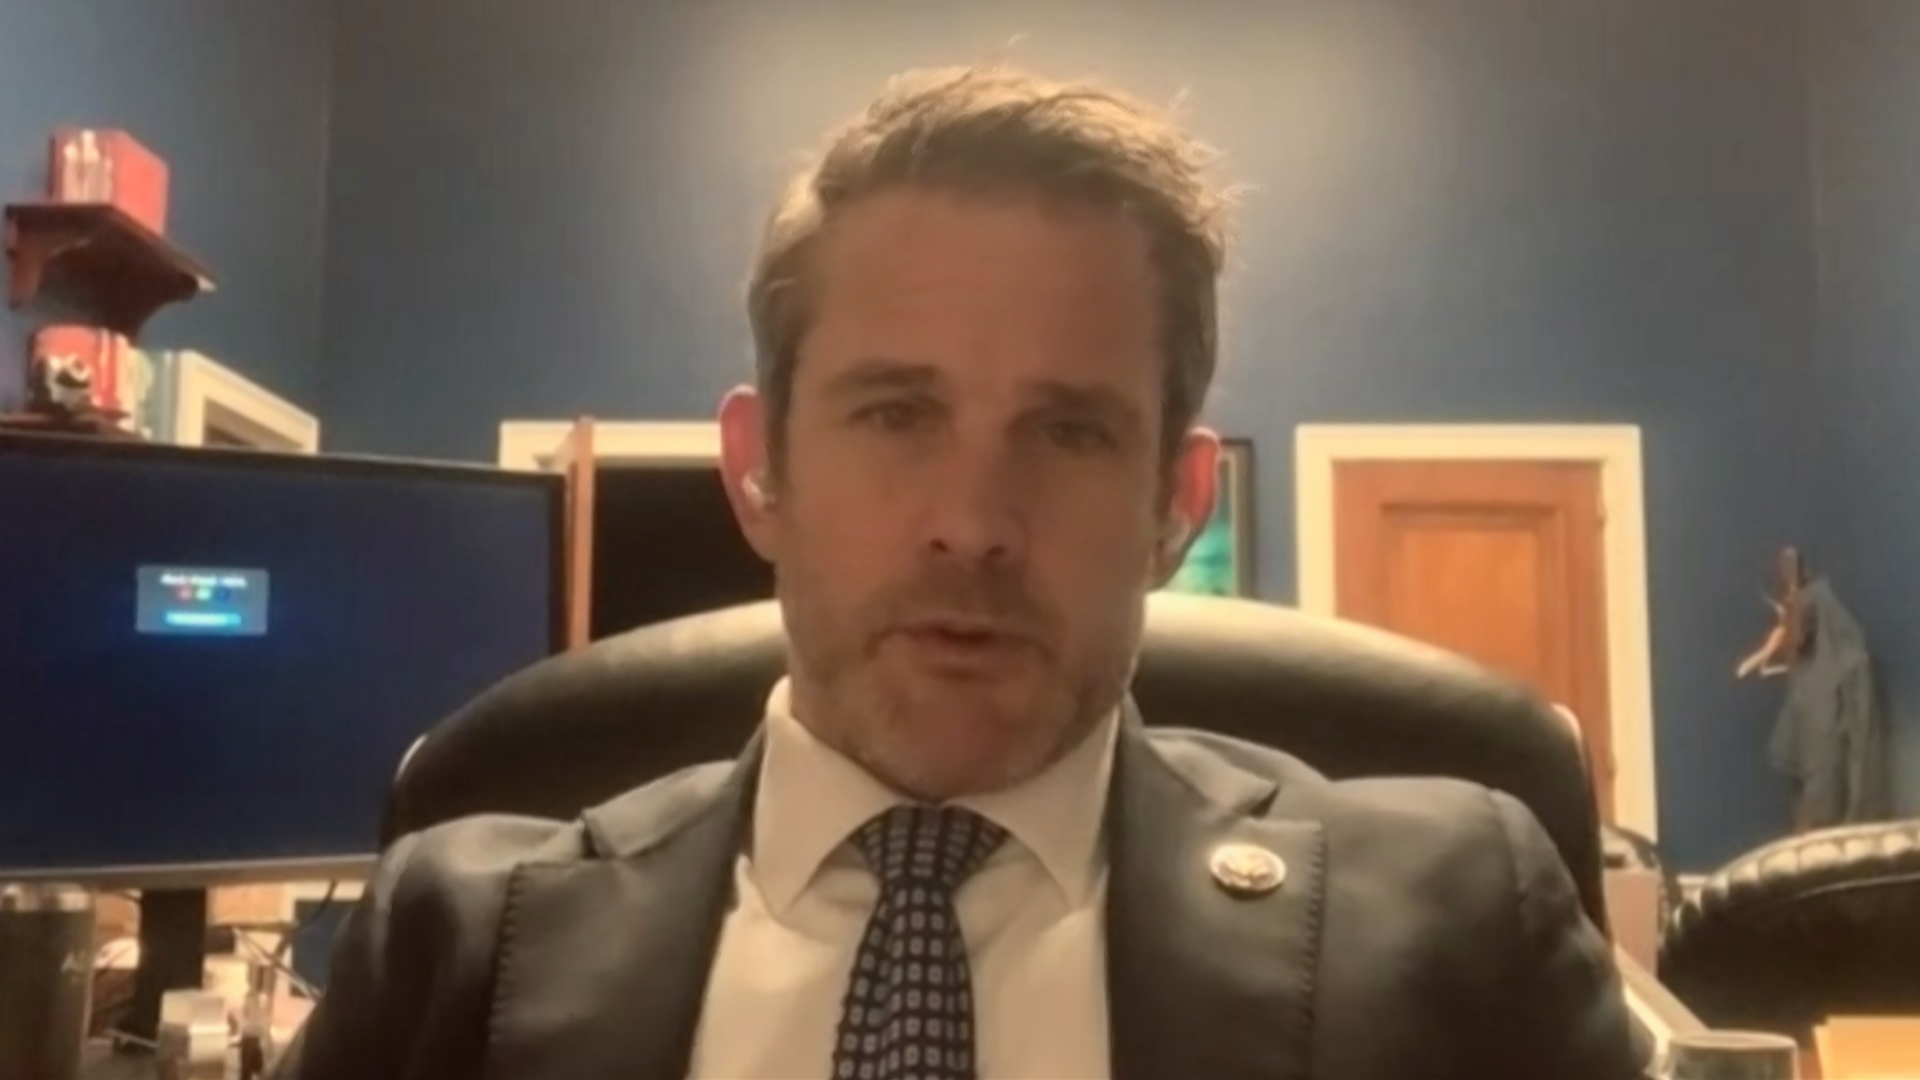 Rep. Kinzinger on Capitol Rioting: 'A Sick, Disgusting Day in American  Democracy' | Chicago News | WTTW